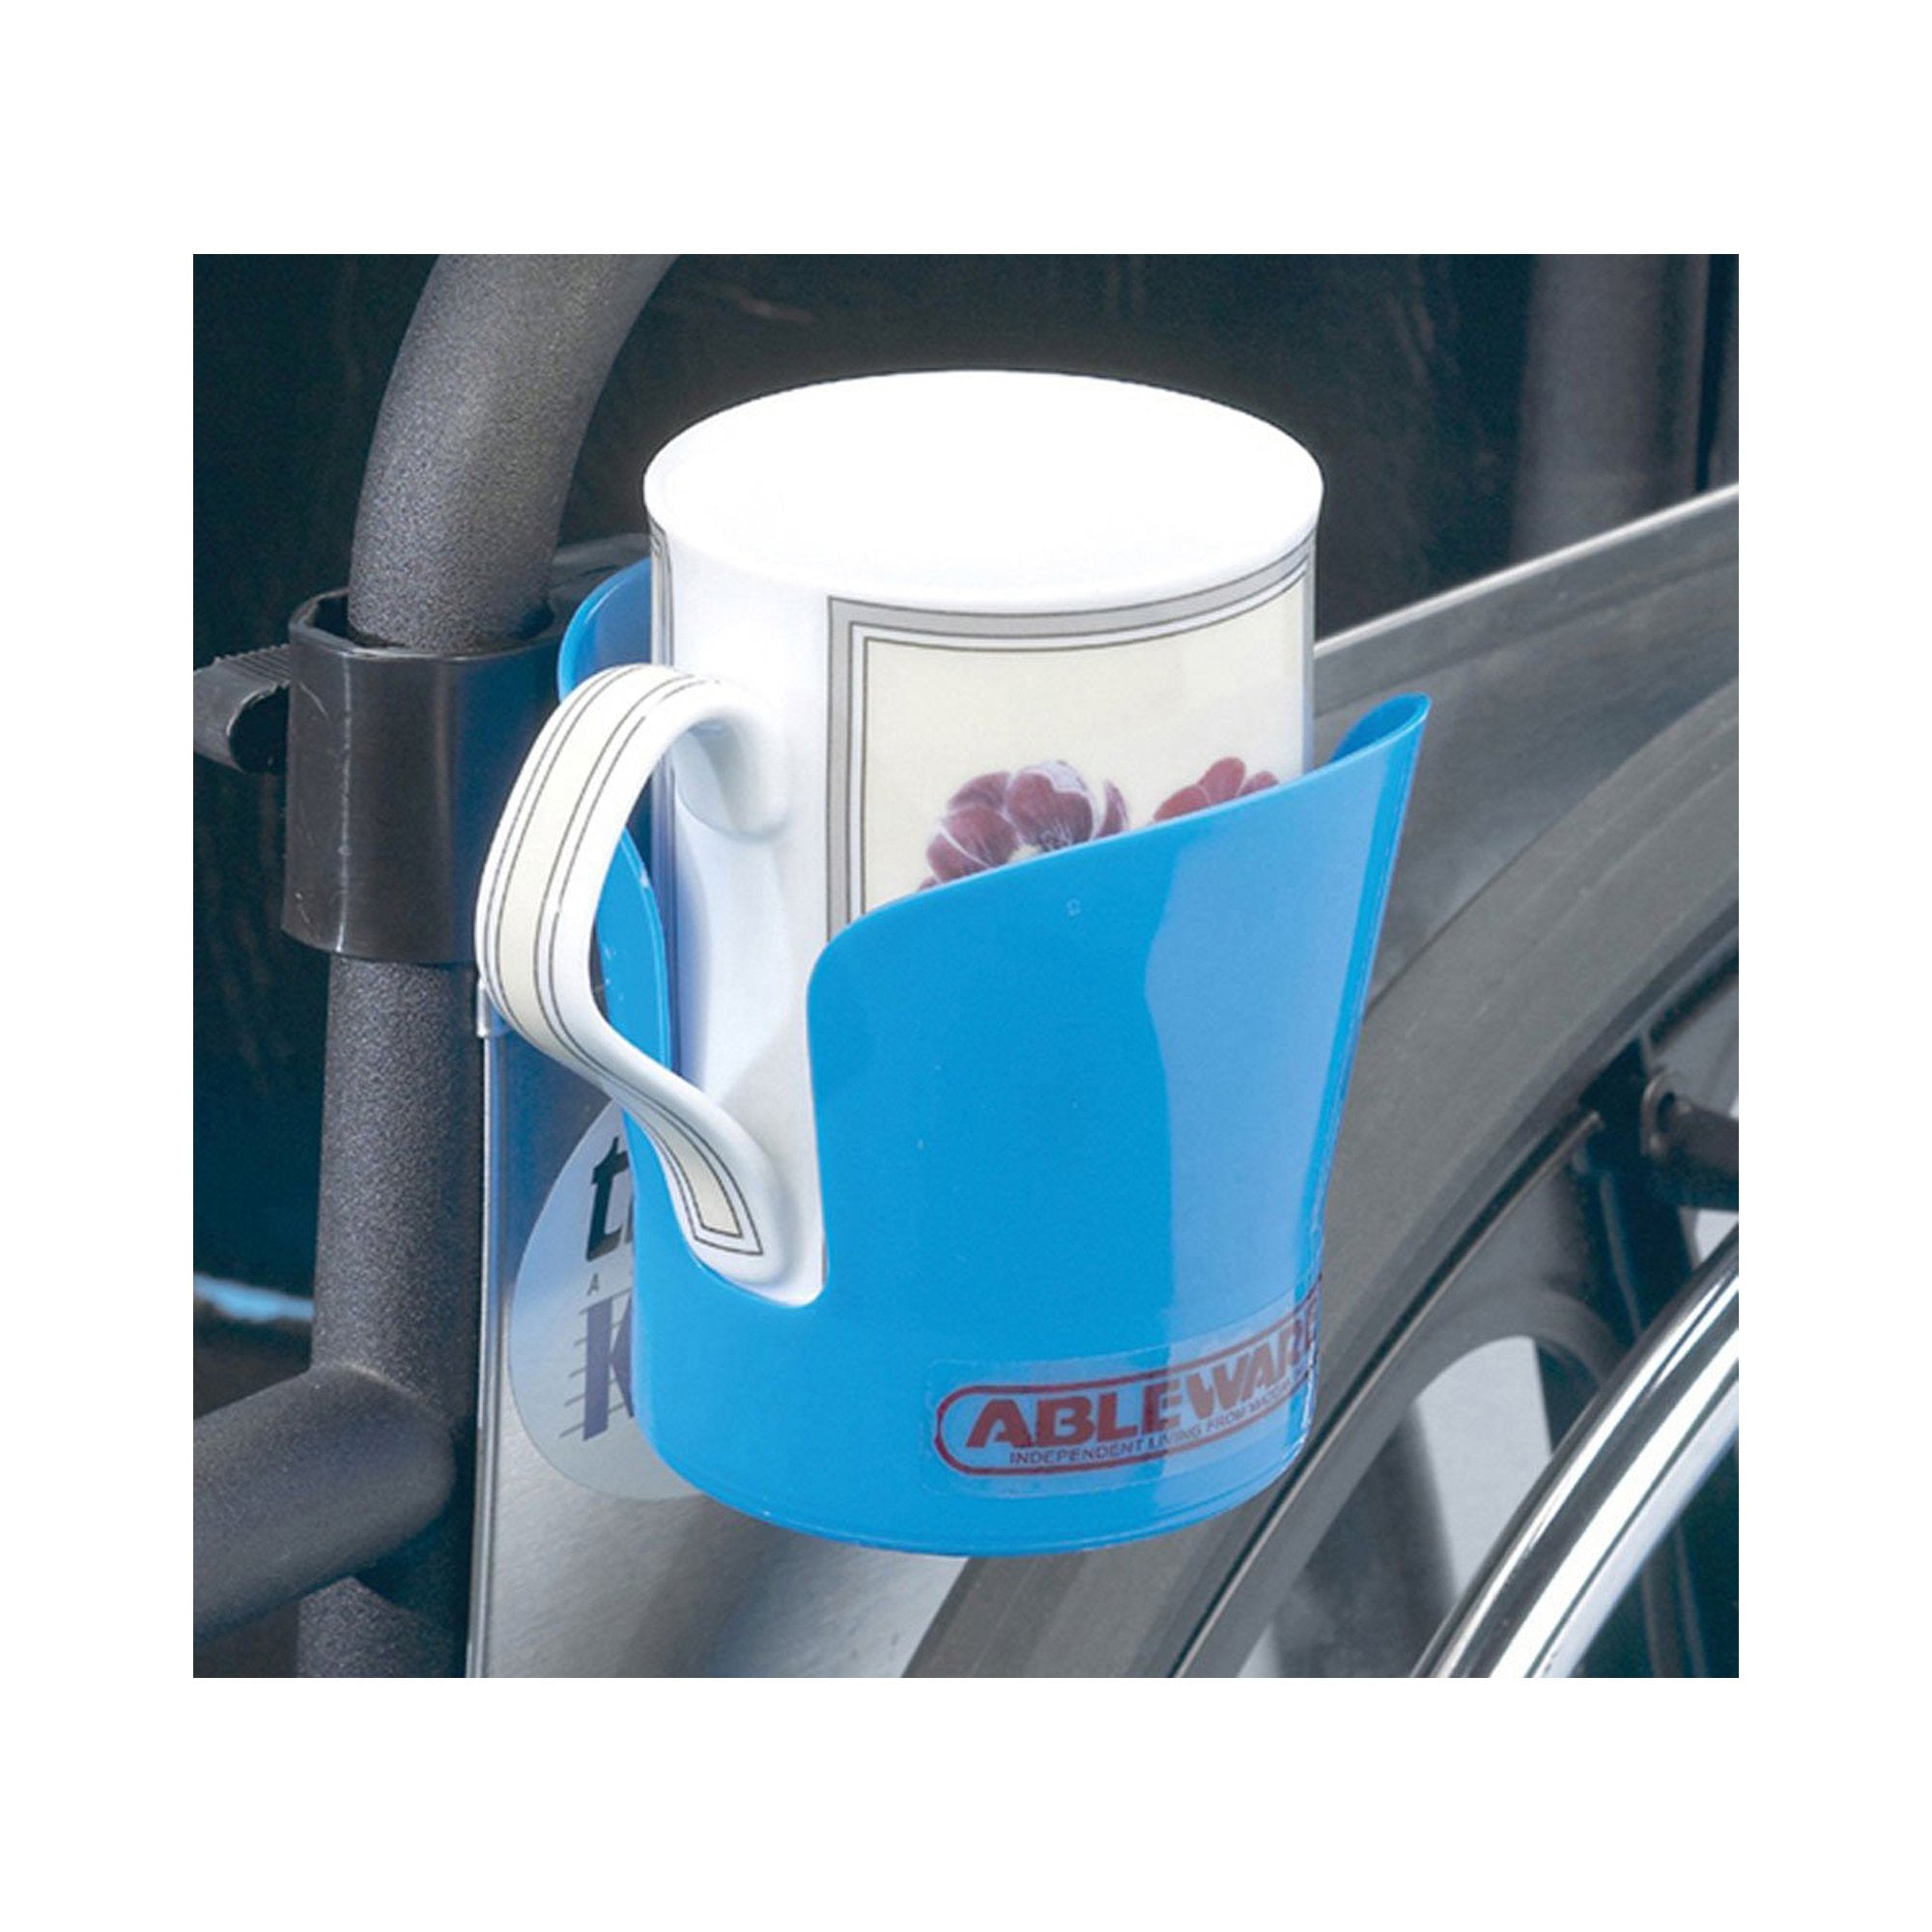 Maddak Cup Holder, For Use With Wheelchair, 2.52 in. Dia. x 5.98 in. H, Plastic